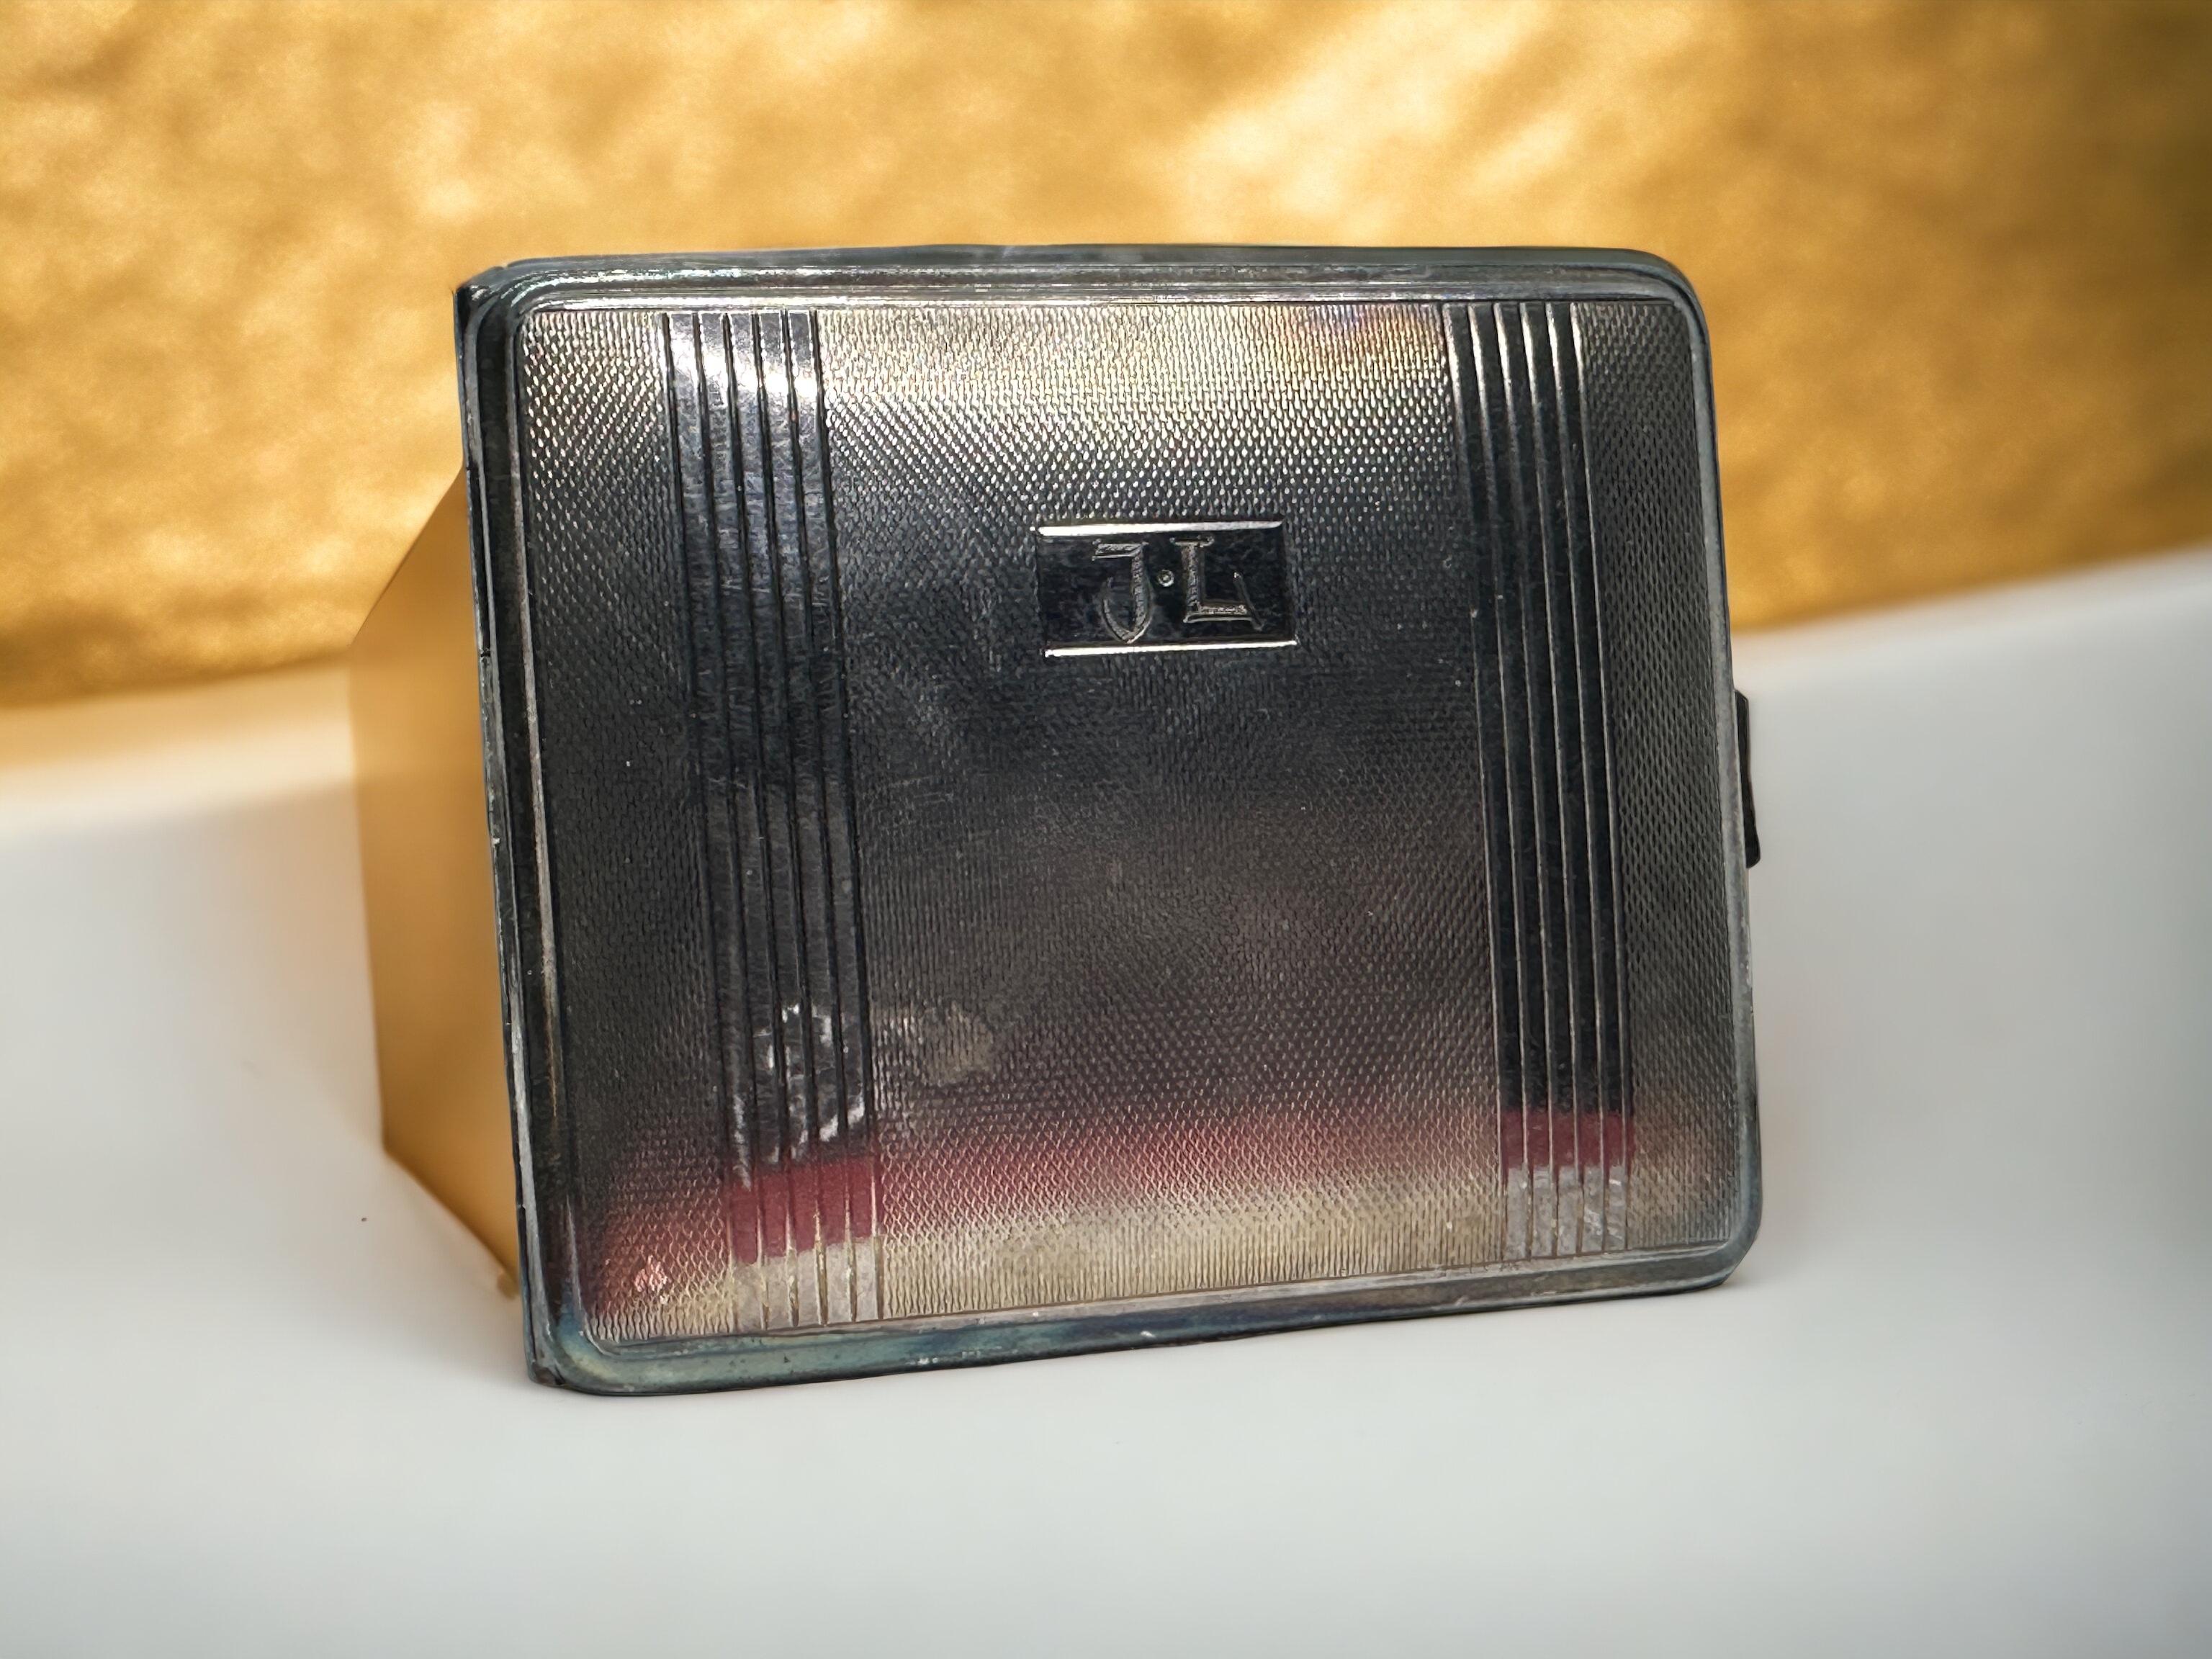 Beautiful Art Deco cigarette case by a German manufacturer. Silver plated alpaca. no makers mark, year 1930s. With J.L. monogram. Some minor dings and scratches commensurate with age and wear. Nice to use it and travel with it.